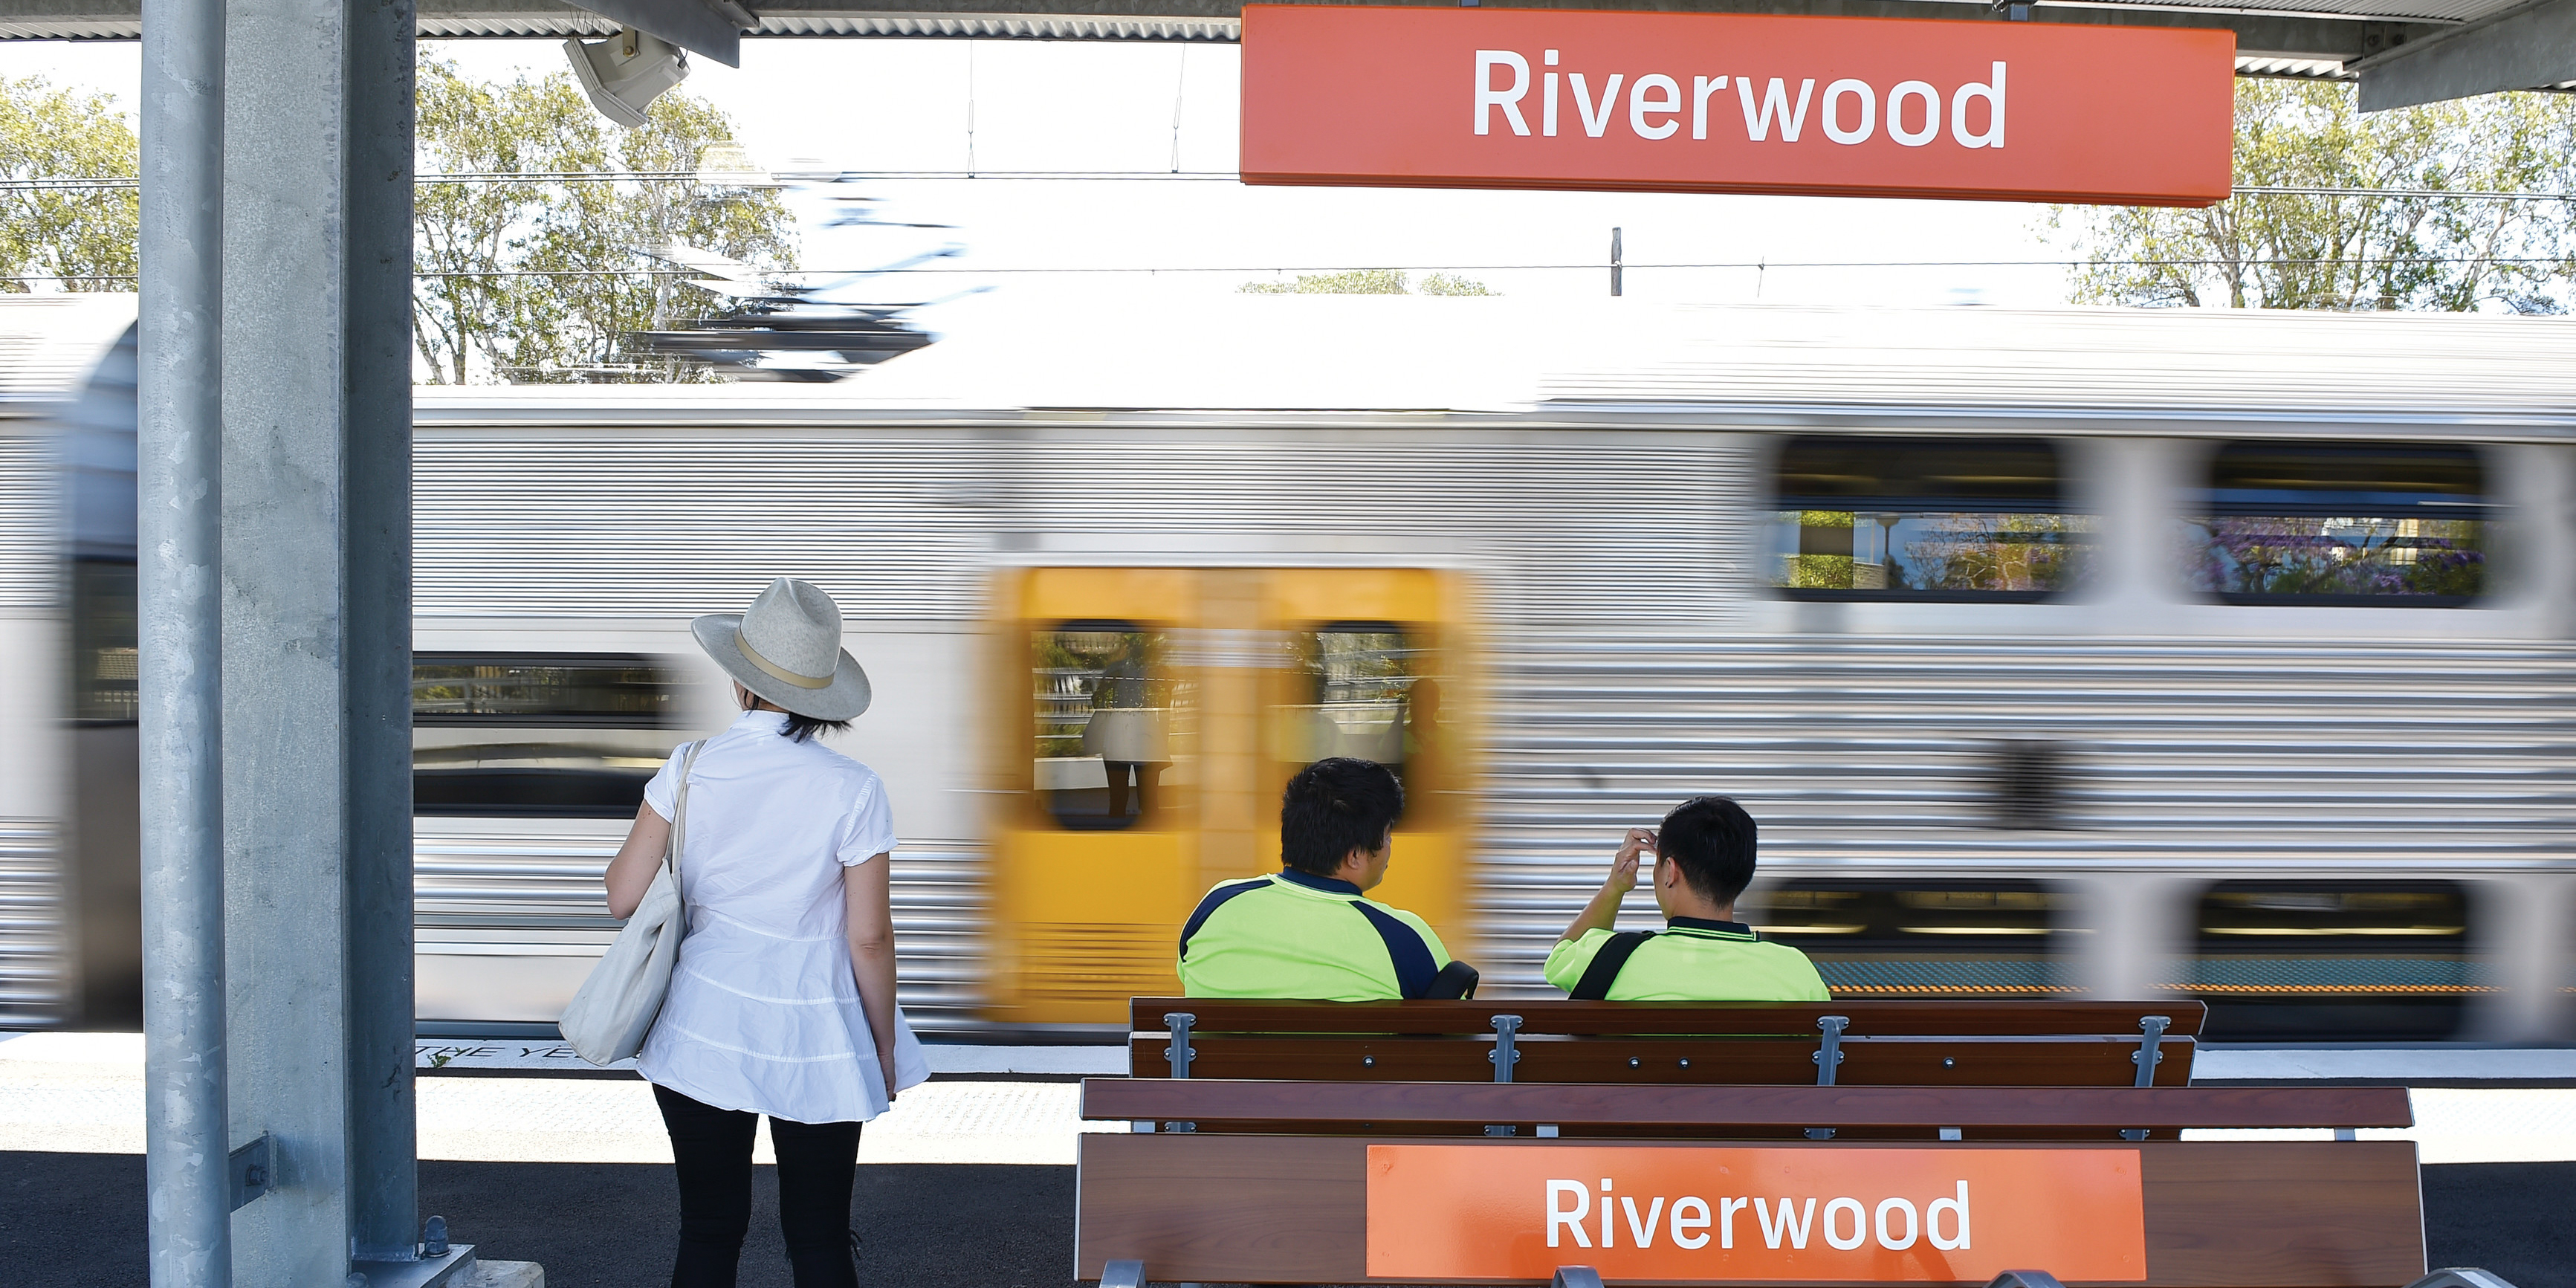 Passengers wait at a train station in Riverwood, NSW.